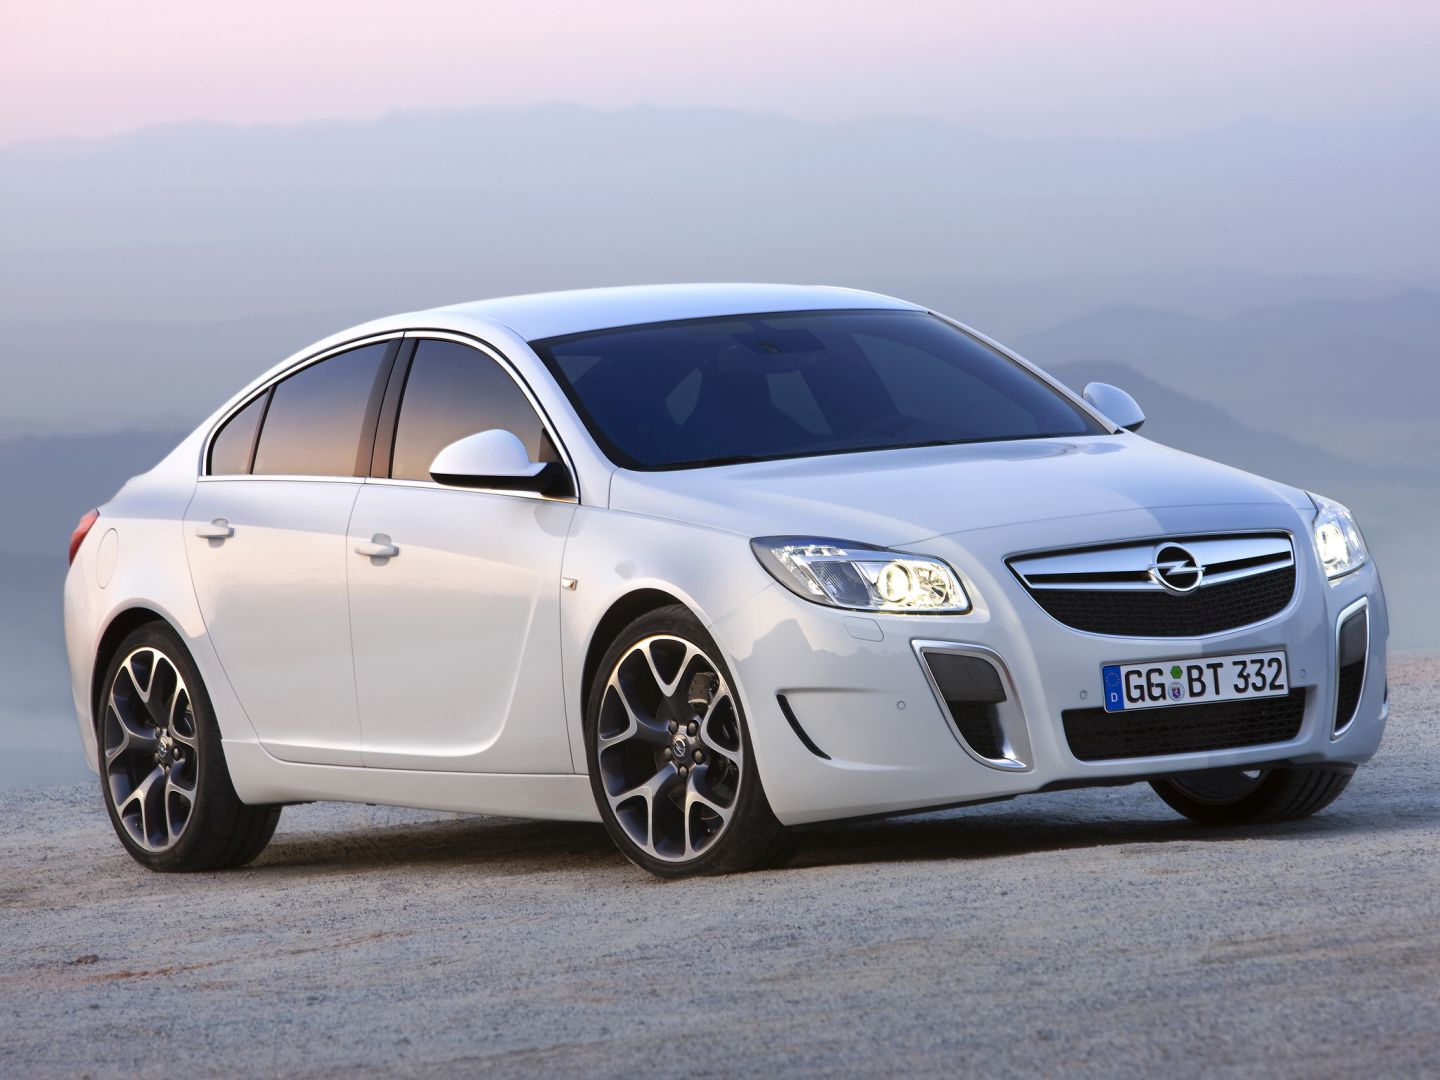 Fichiers Tuning Haute Qualité Opel Insignia 2.8 V6 OPC - Turbo 325hp